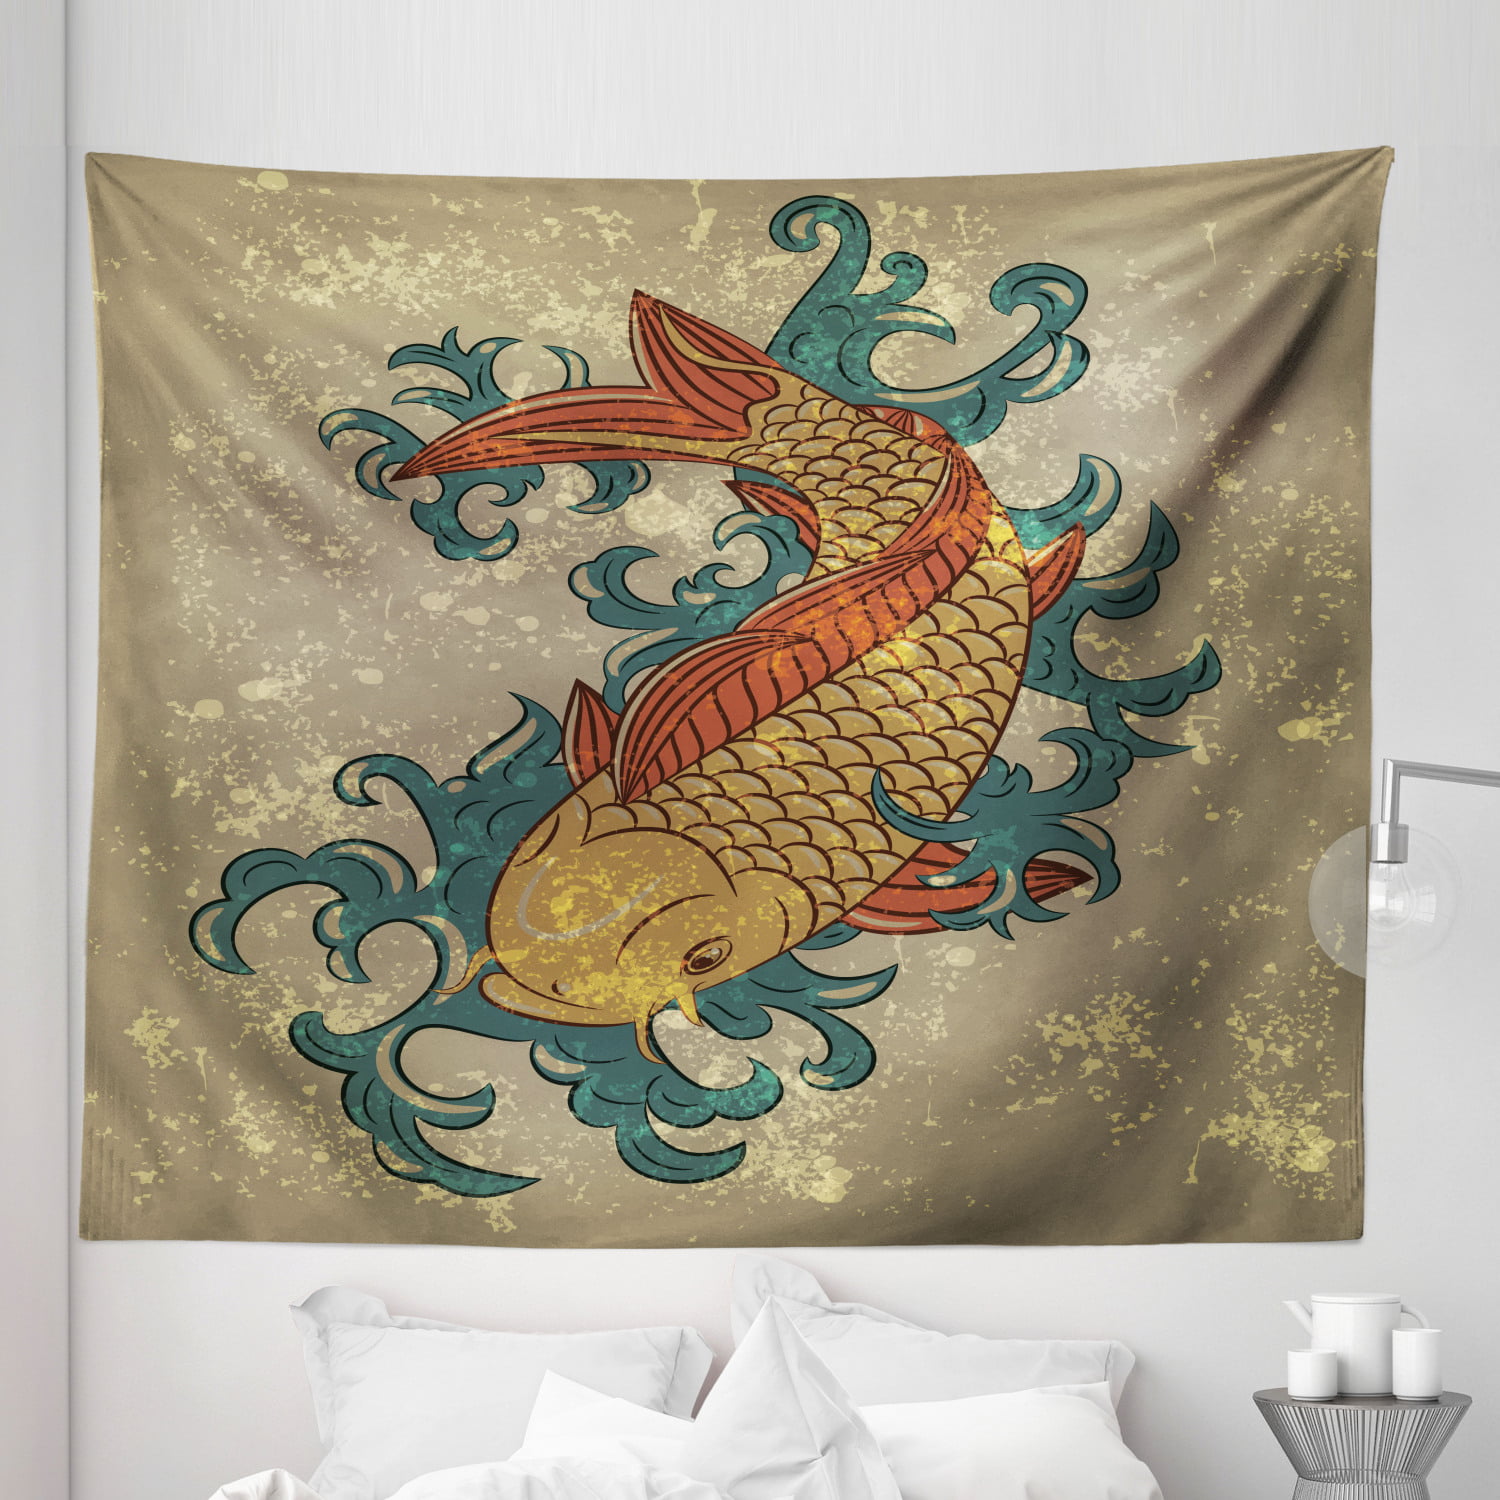 Ambesonne Japanese Tapestry, Grunge Style Oriental Water Koi Carp Fish Aquatic Theme Distressed Pattern, Fabric Wall Hanging Decor for Bedroom Living Room Dorm